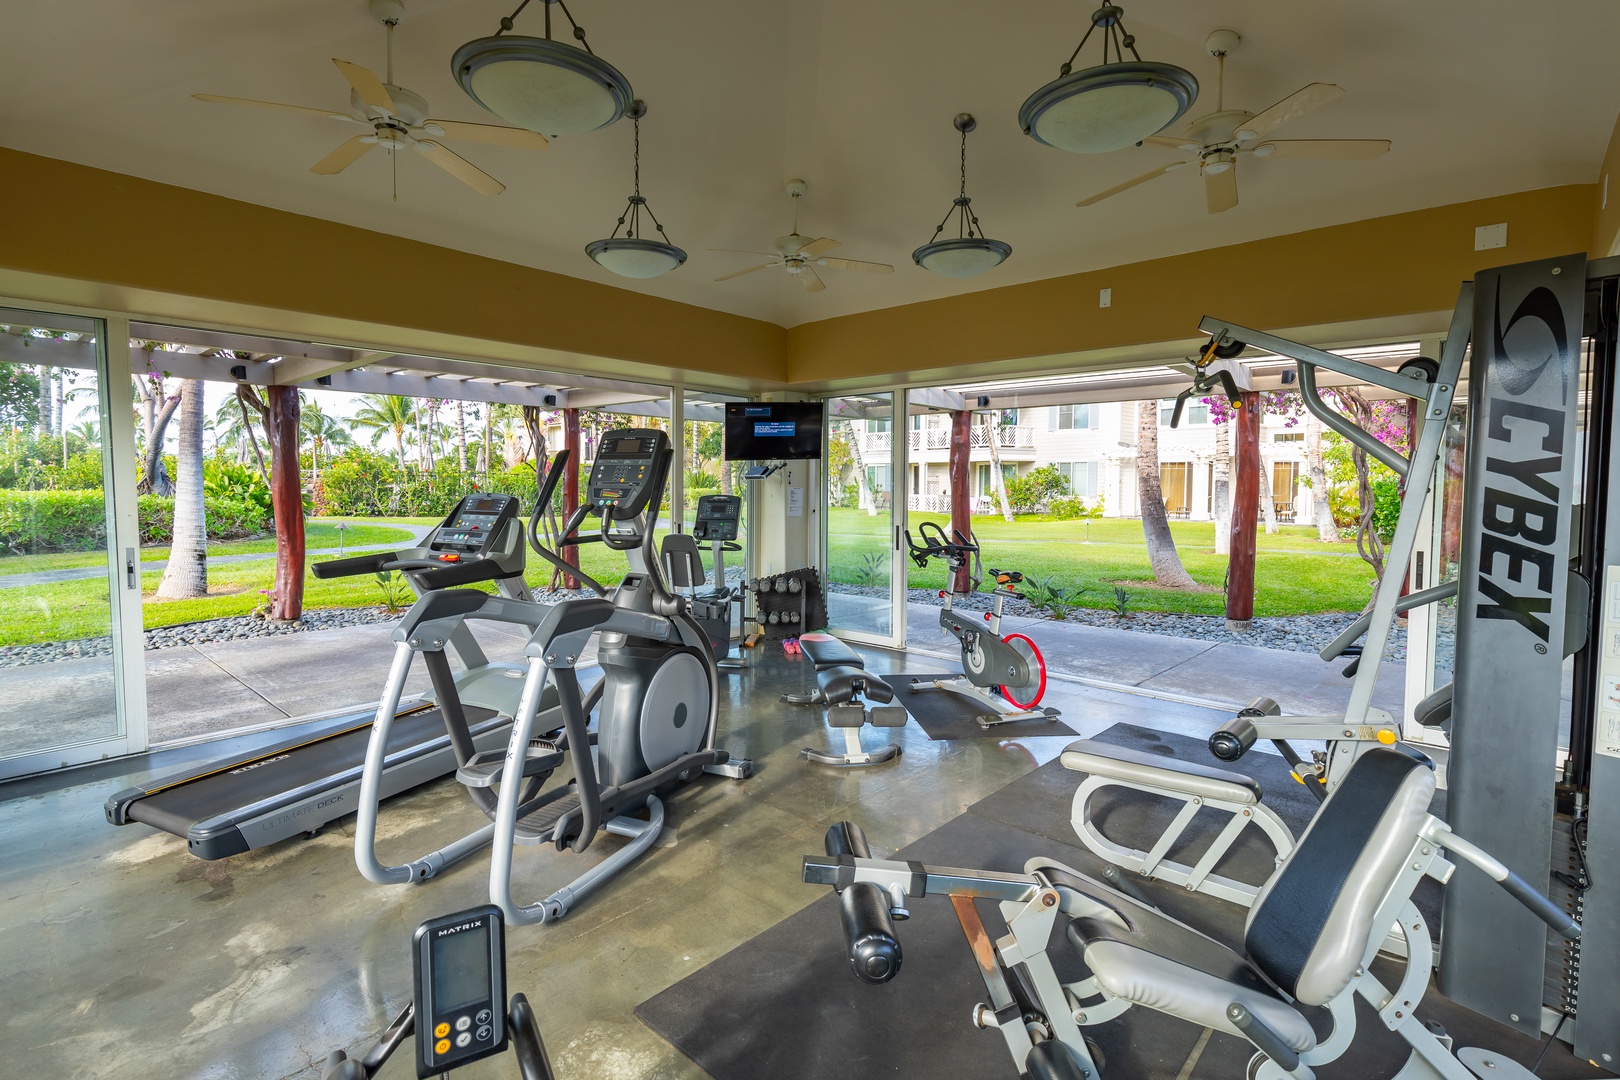 Waikoloa Vacation Rentals, Fairway Villas at Waikoloa Beach Resort E34 - The work out facility offers an open air concept next to the pool